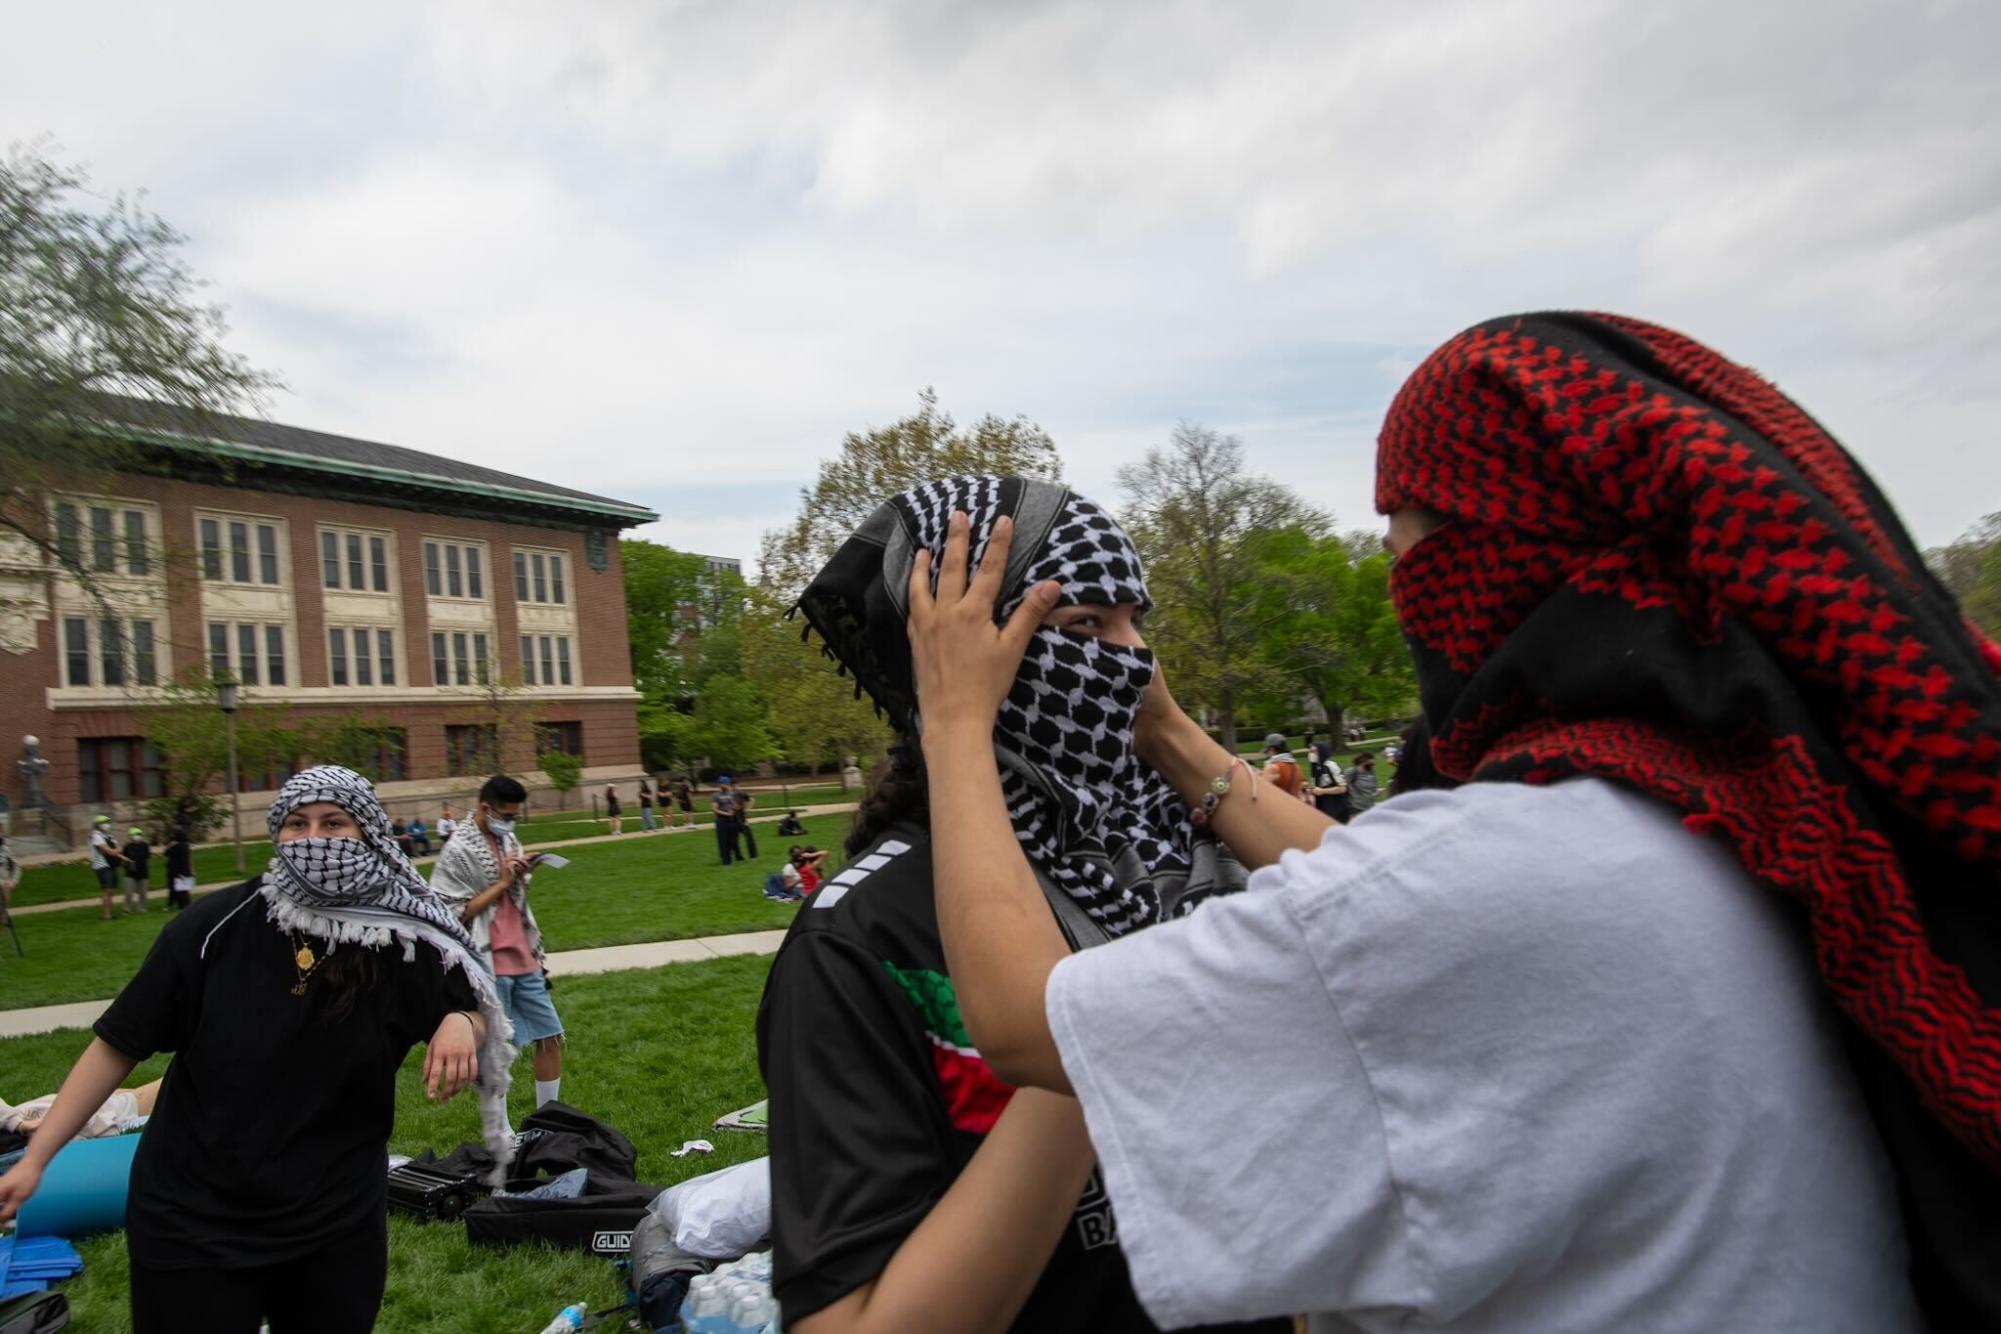 Protesters put on Keffiyeh to block their faces during the demonstration.